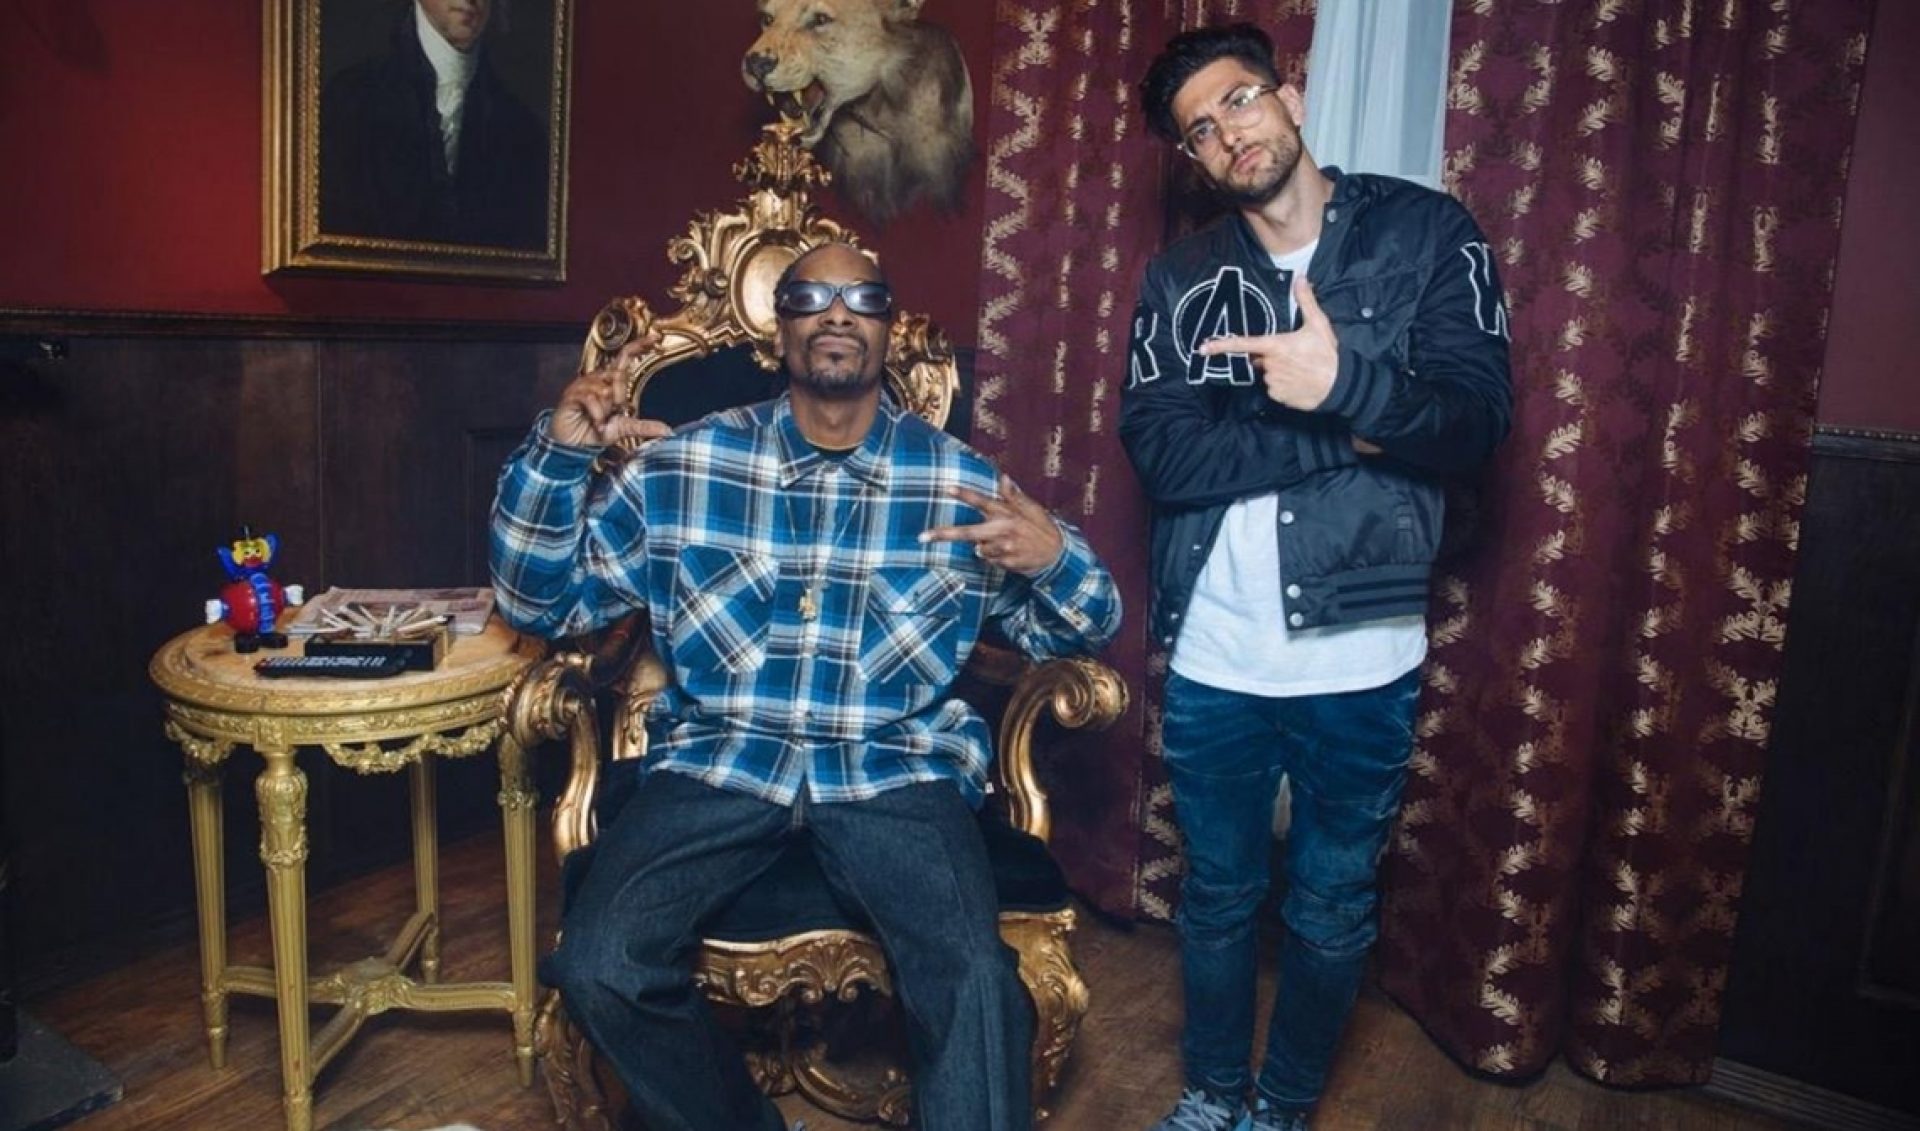 Jesse Wellens Directs Politically-Charged Music Video For Snoop Dogg’s Latest Single